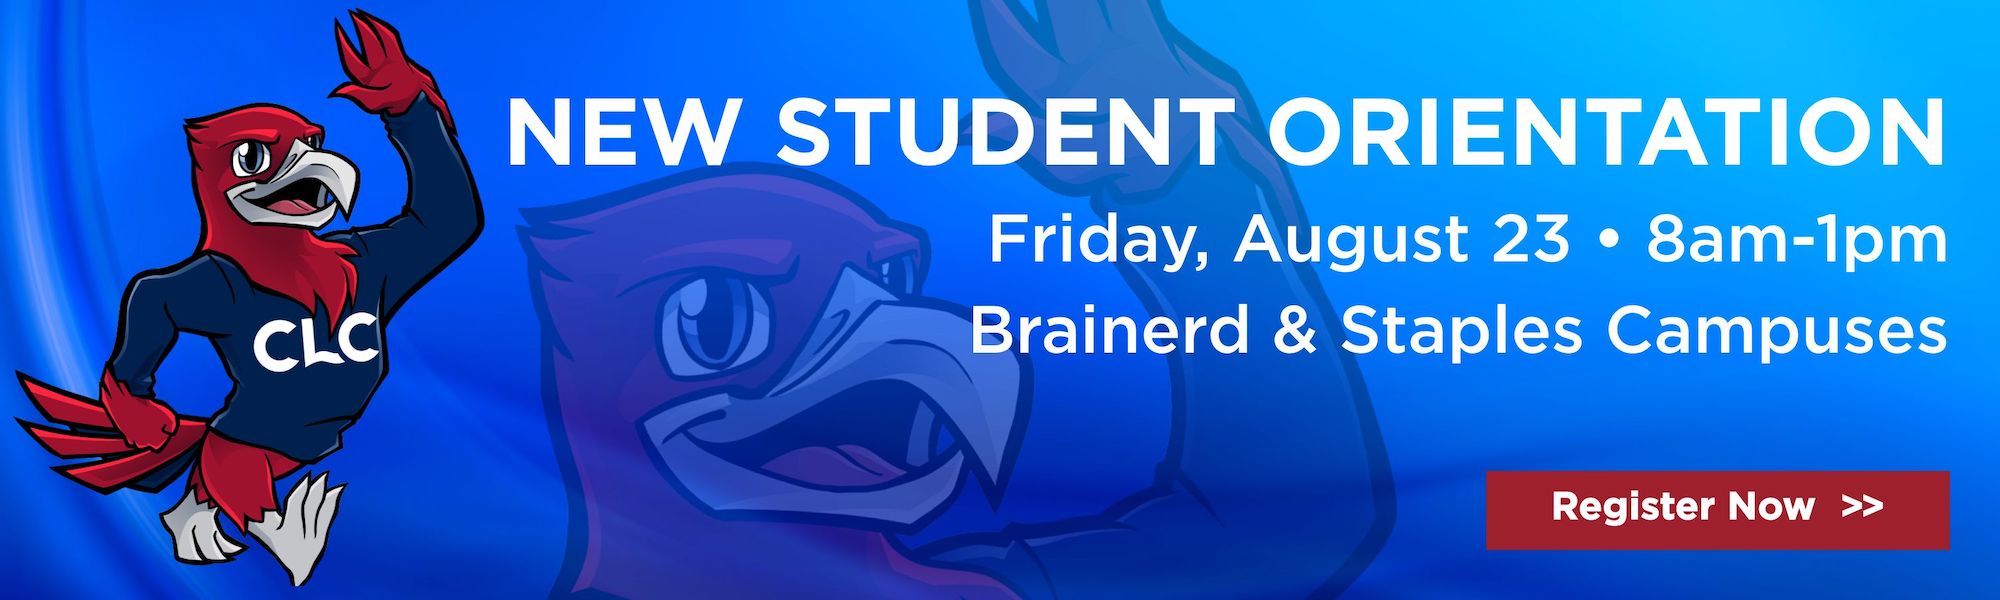 NEW STUDENT ORIENTATION Friday, August 23 • 8am-1pm Brainerd & Staples Campuses